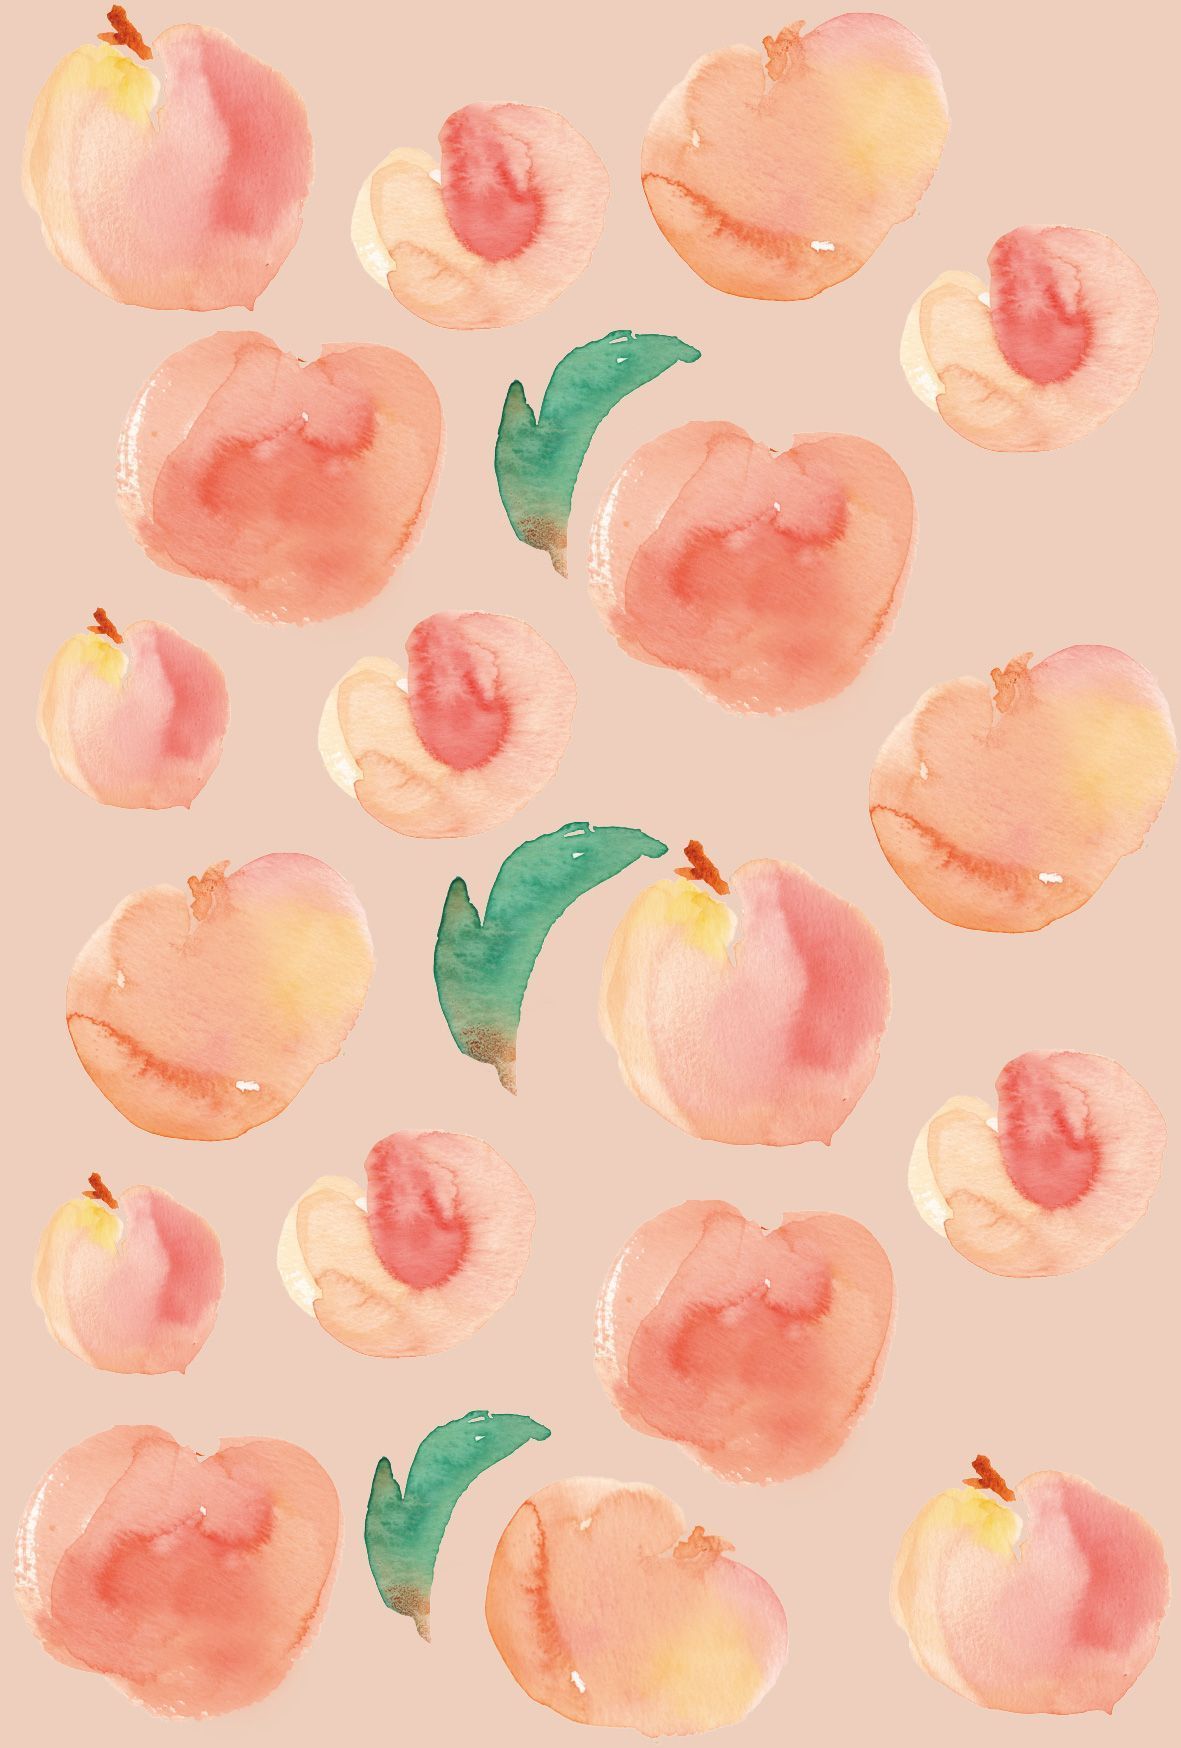 A pattern of peaches and leaves - Peach, fruit